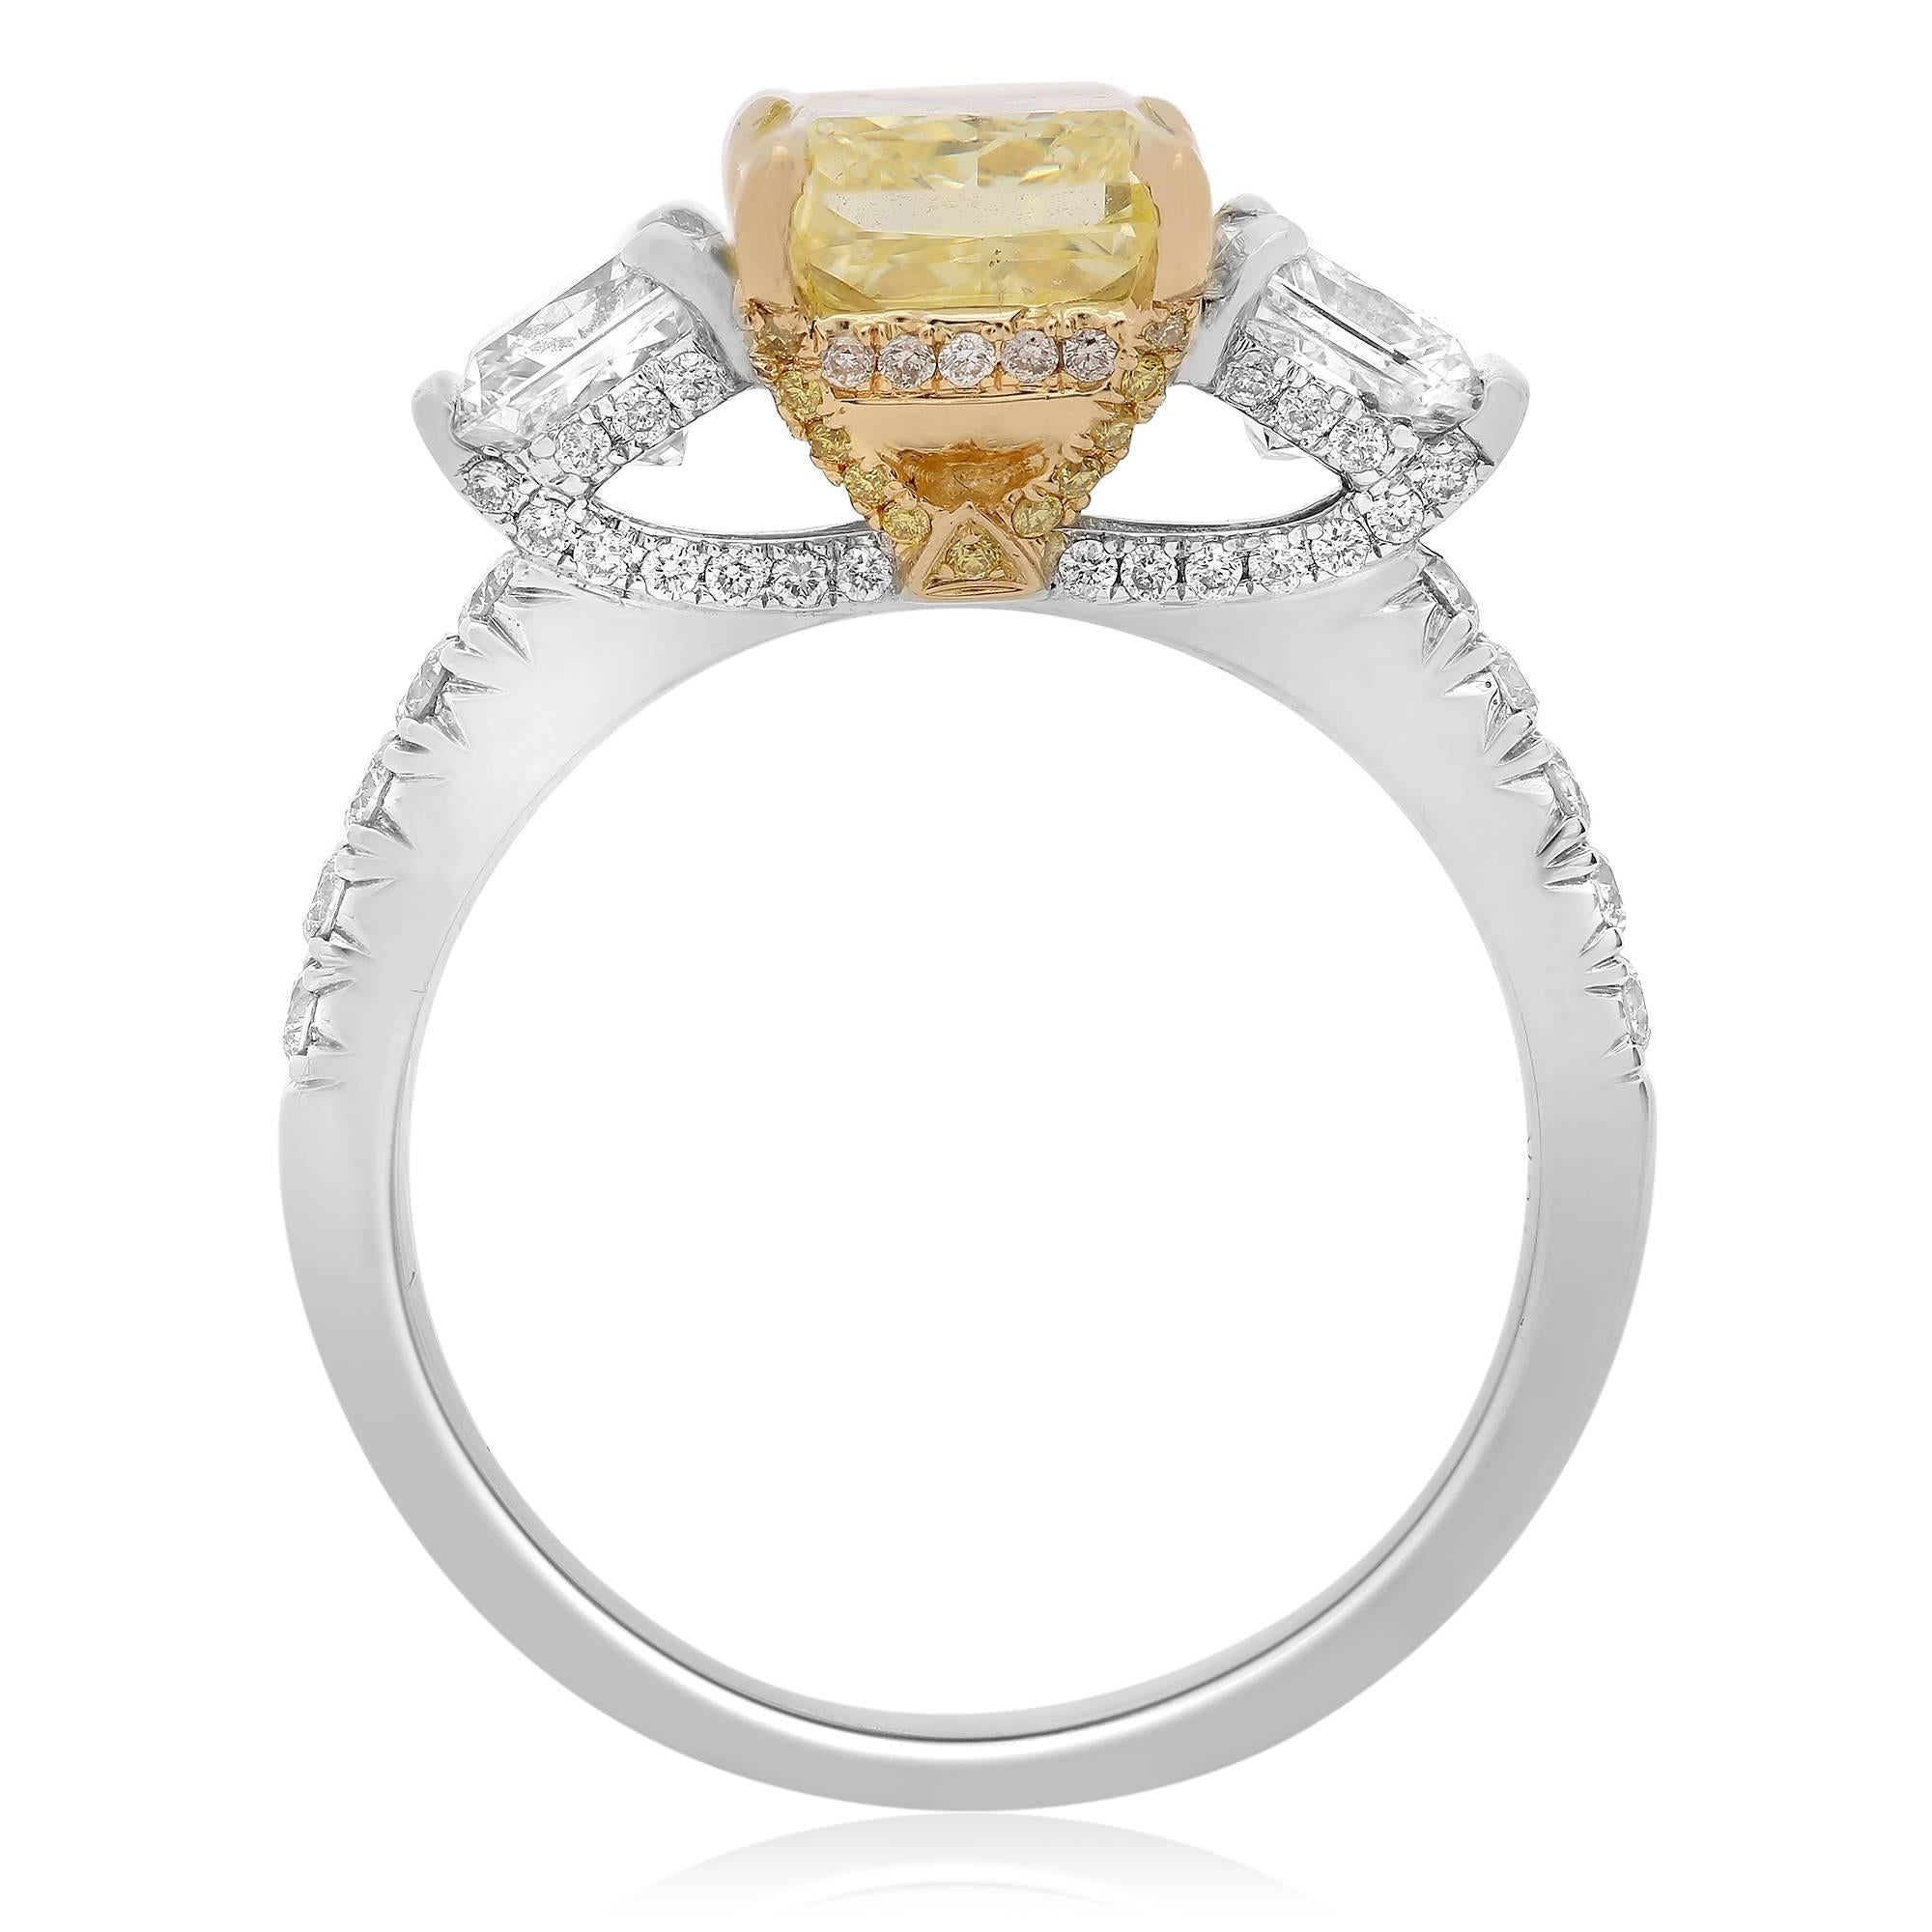 Three stone ring features Fancy Intense Yellow colored Radiant Cut Diamond with two radiant cut diamonds on both sides. Perfect as a three stone engagement ring with pave diamonds running one-quarter way down the shank and around the basket.